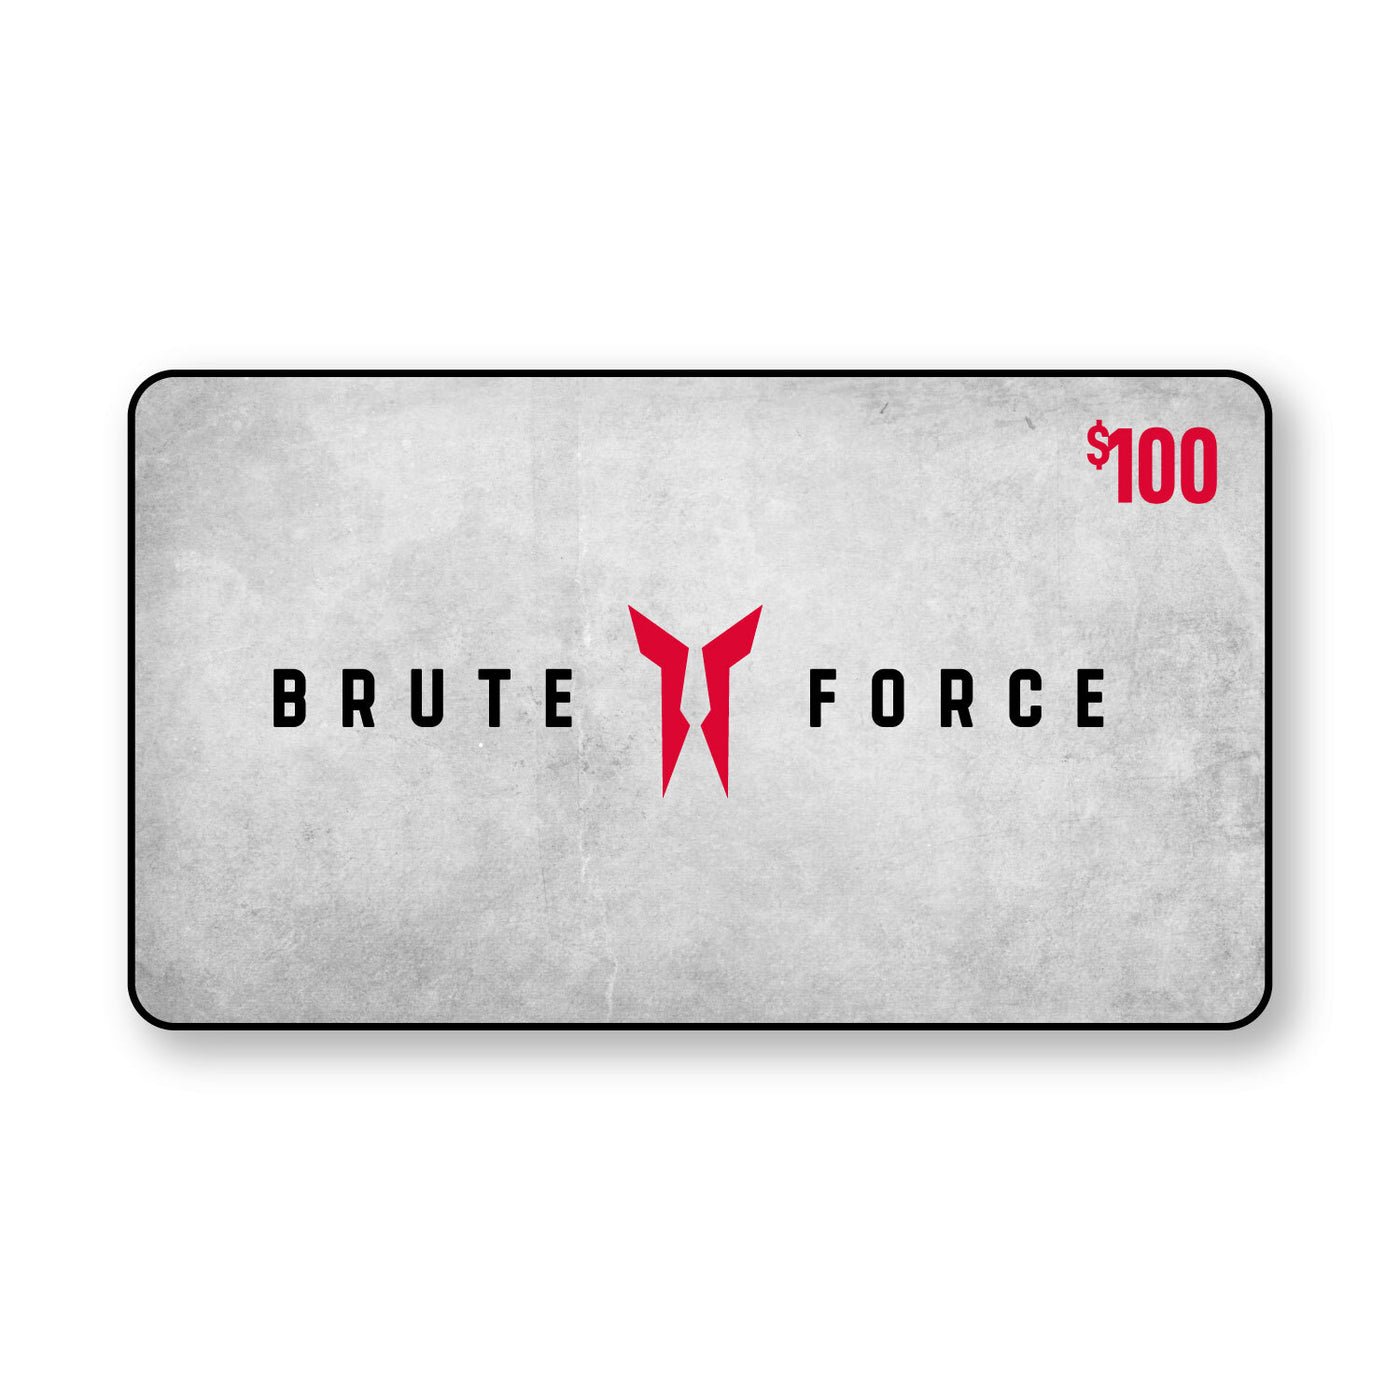 Brute Force E-Gift Cards - Brute Force Training